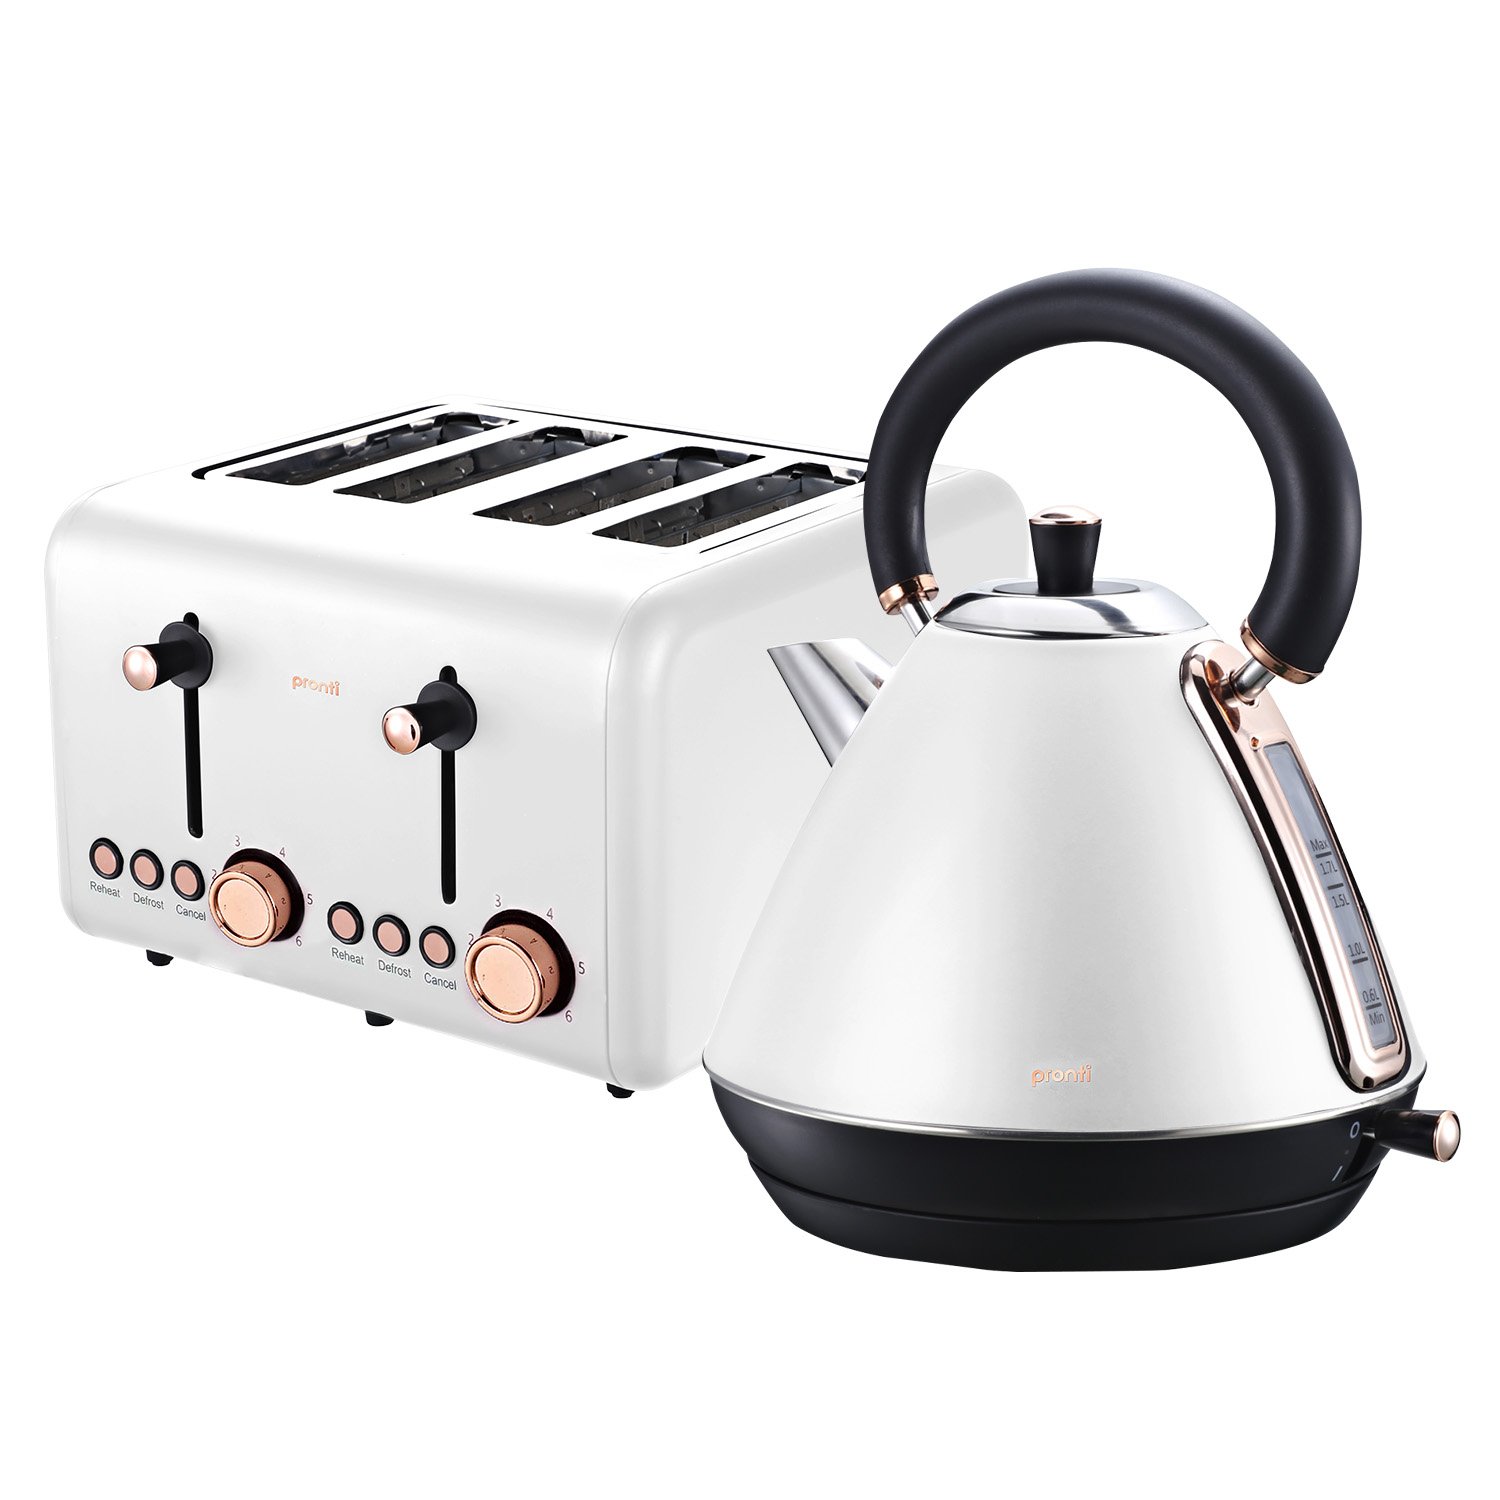 Pronti Rose Trim Collection Toaster & Kettle Bundle - White 2